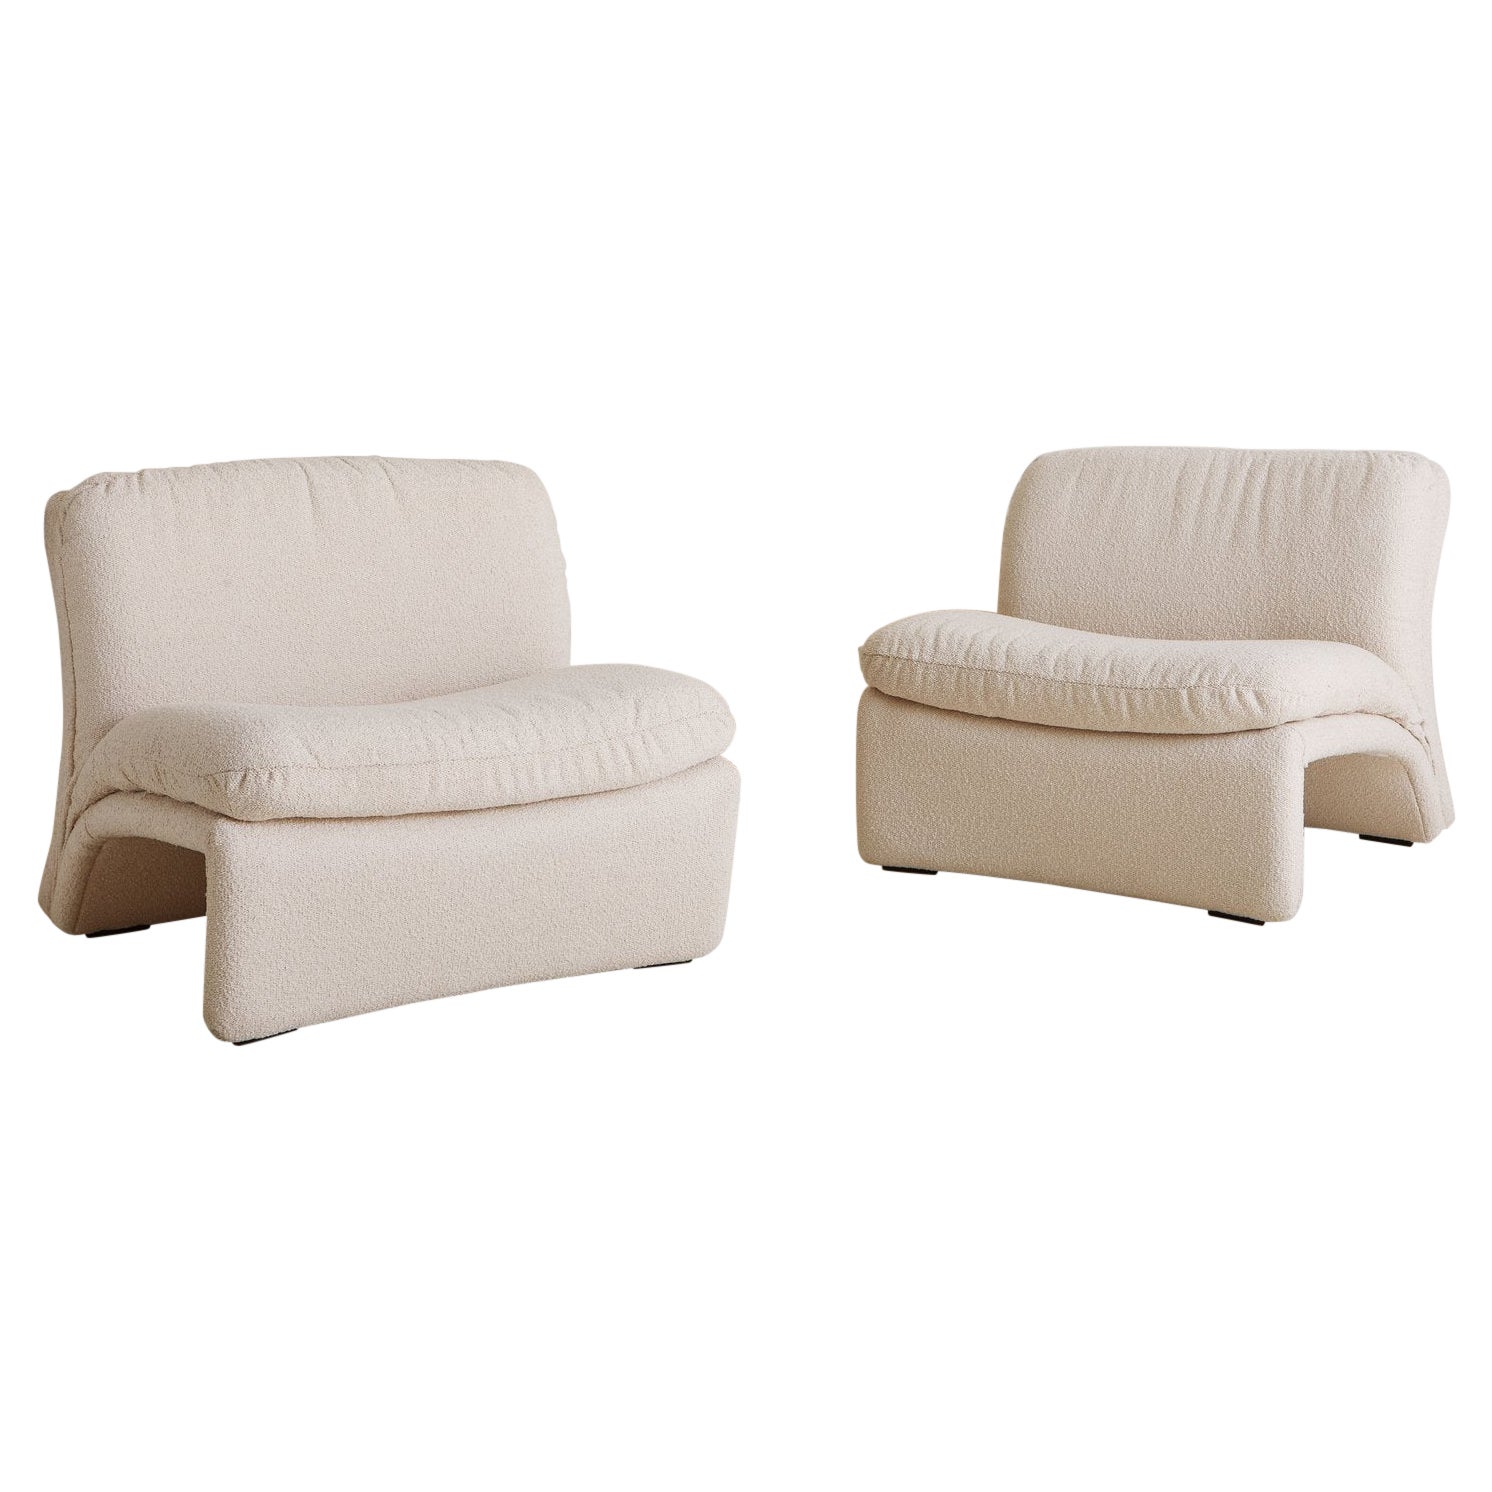 Pair of Curved Ivory Lounge Chairs, Italy 20th Century